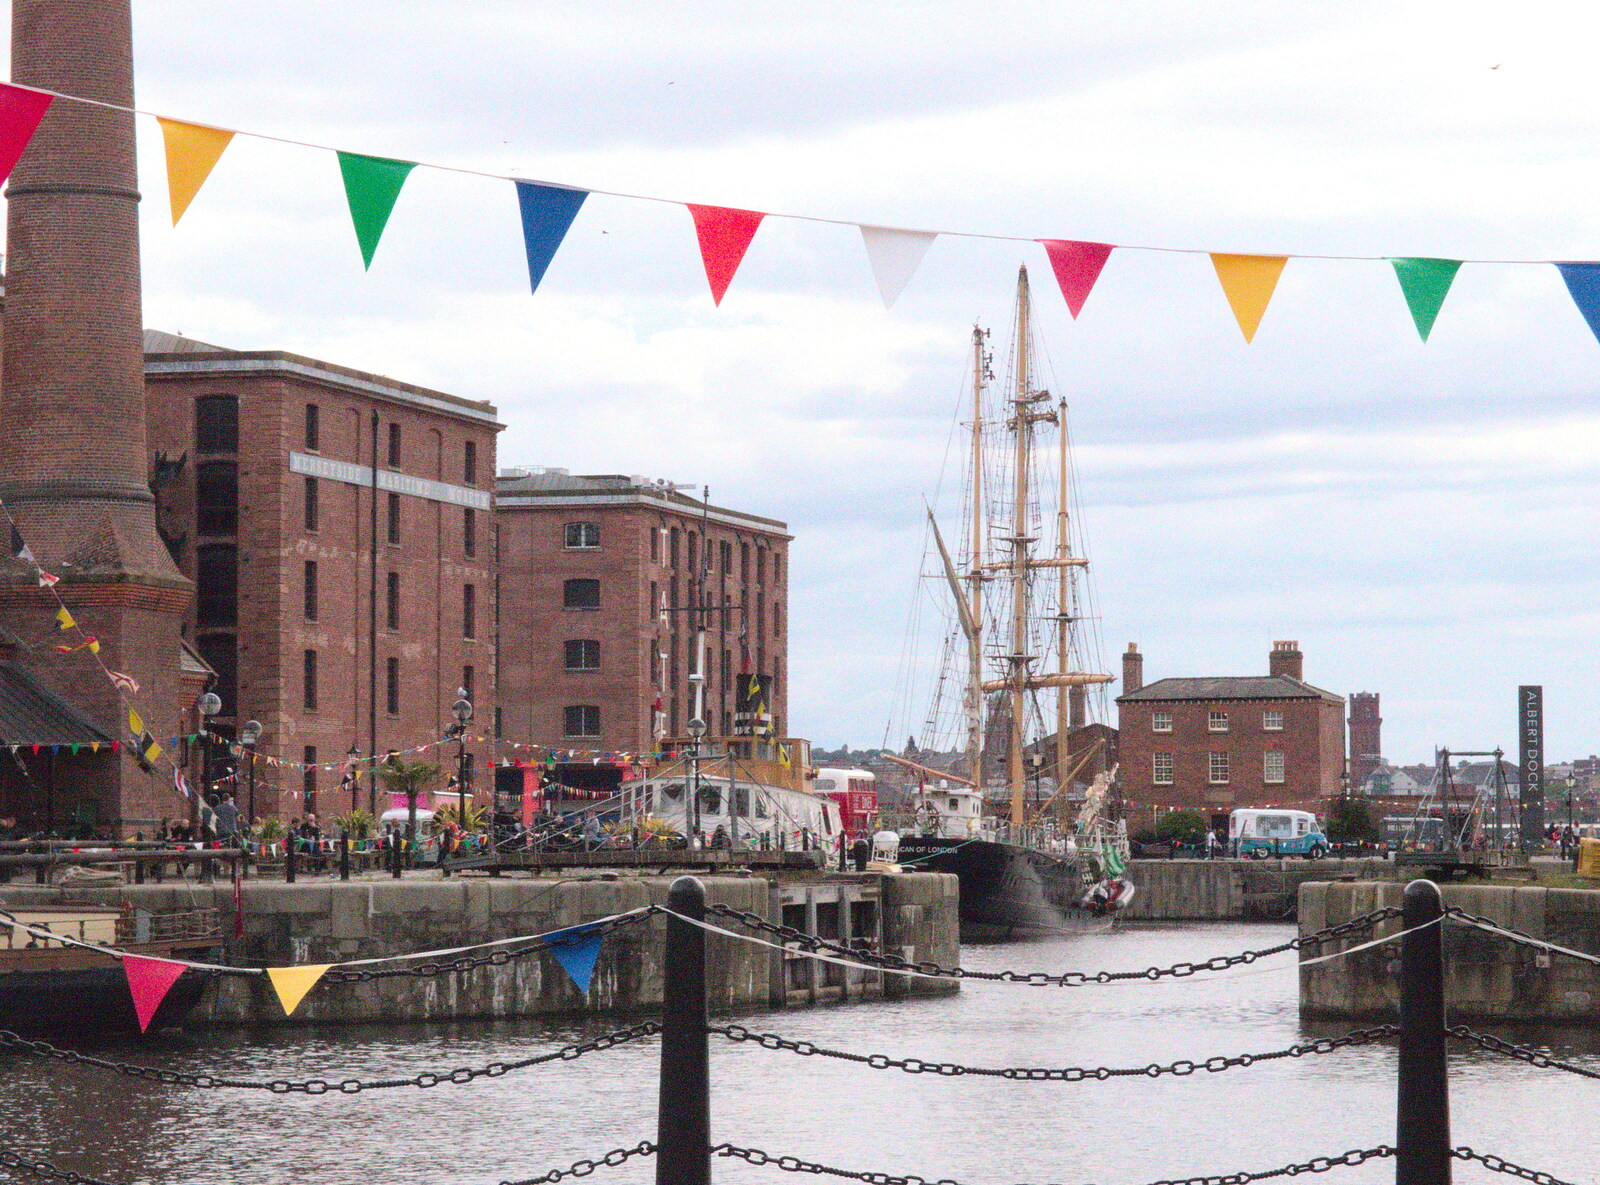 The revamped Albert Dock, near the Liver Building from Liverpool to Baile an Sceilg, County Kerry, Ireland - 30th July 2017